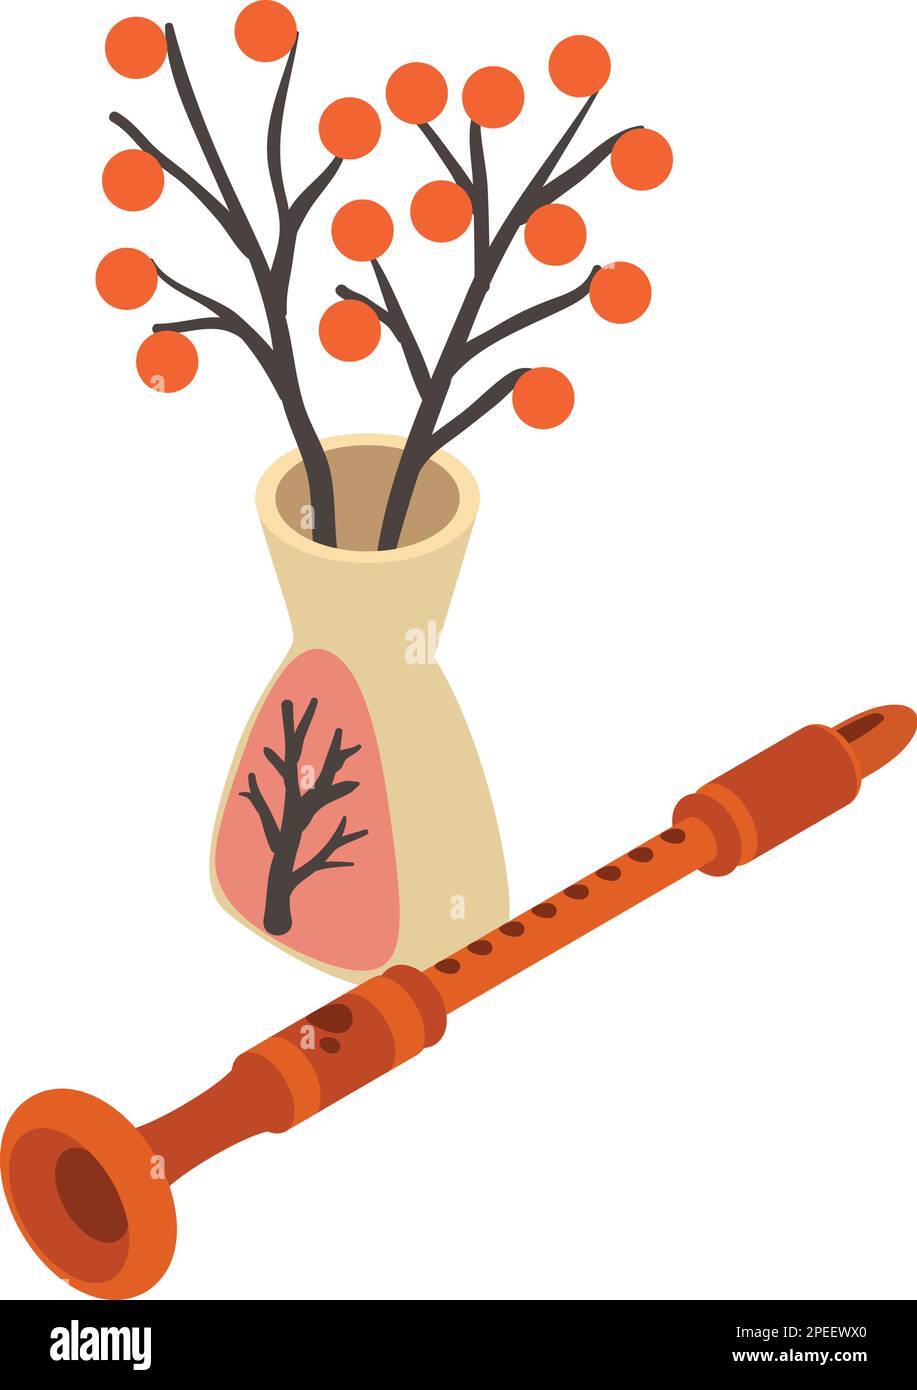 Musical pipe icon isometric vector. Wind instrument near vase with flower icon. Music concept Stock Vector